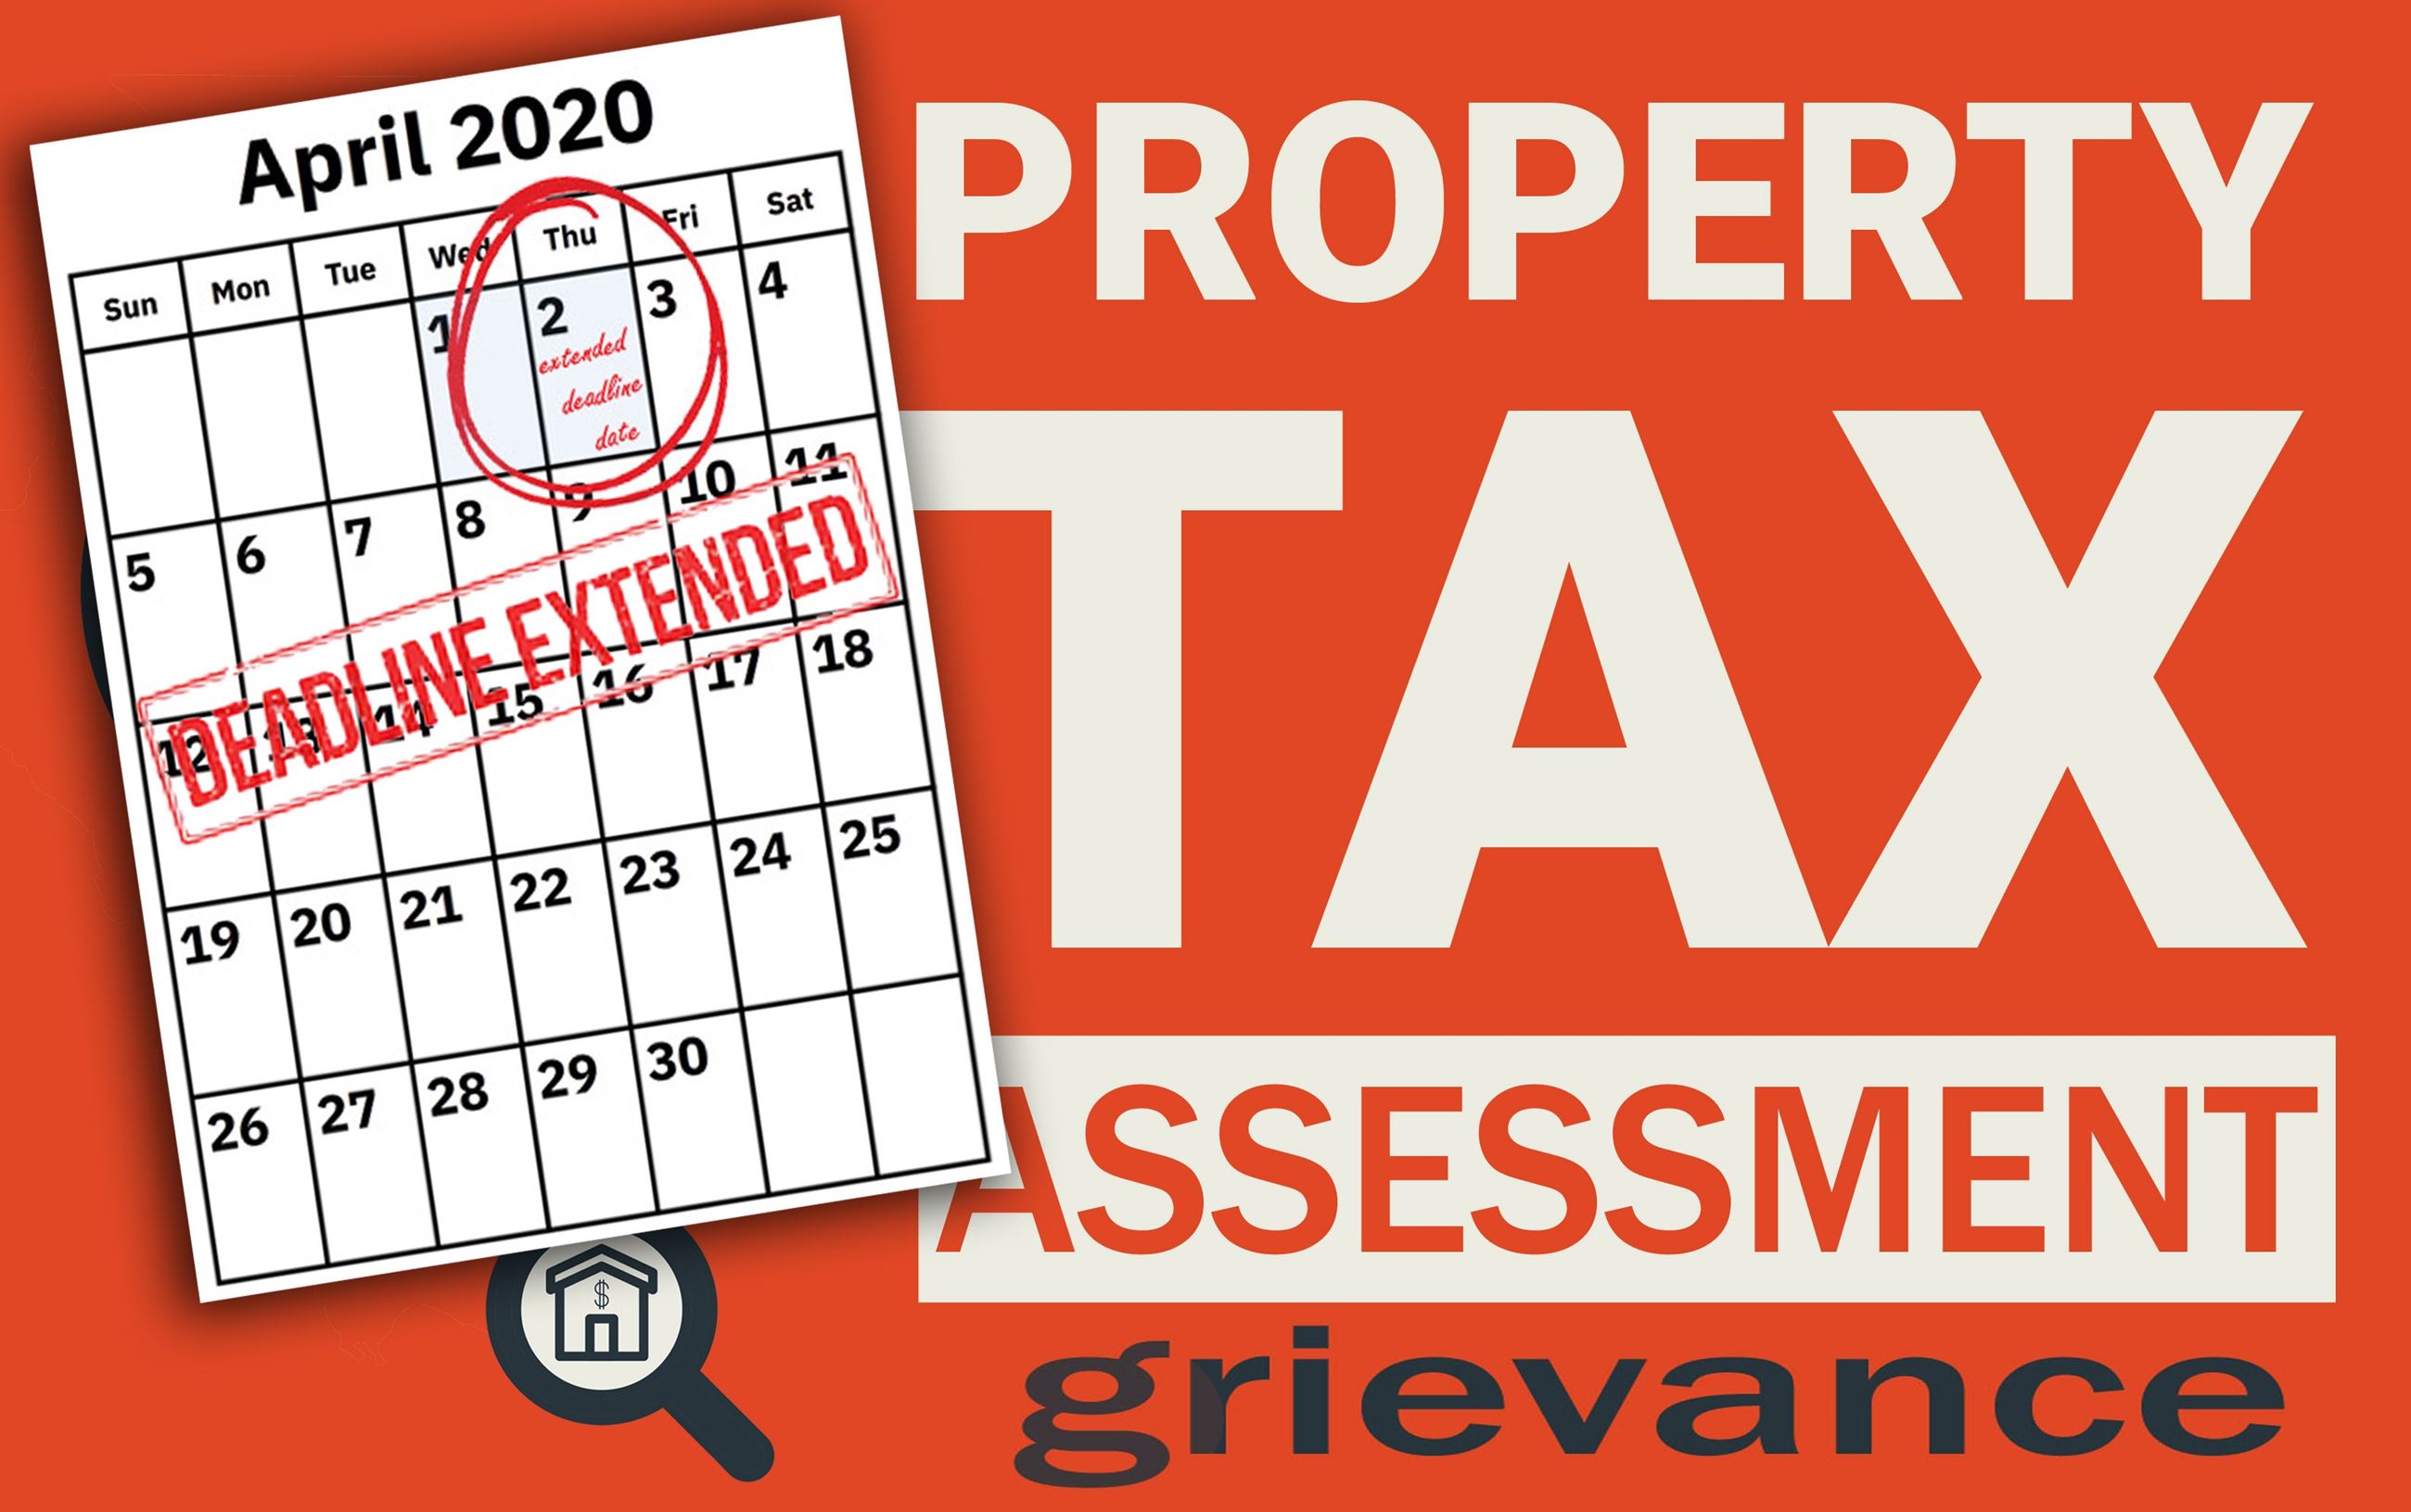 PROPERTY TAX ASSESSMENT GRIEVANCE DEADLINE HAS BEEN EXTENDED TO APRIL 2, 2020